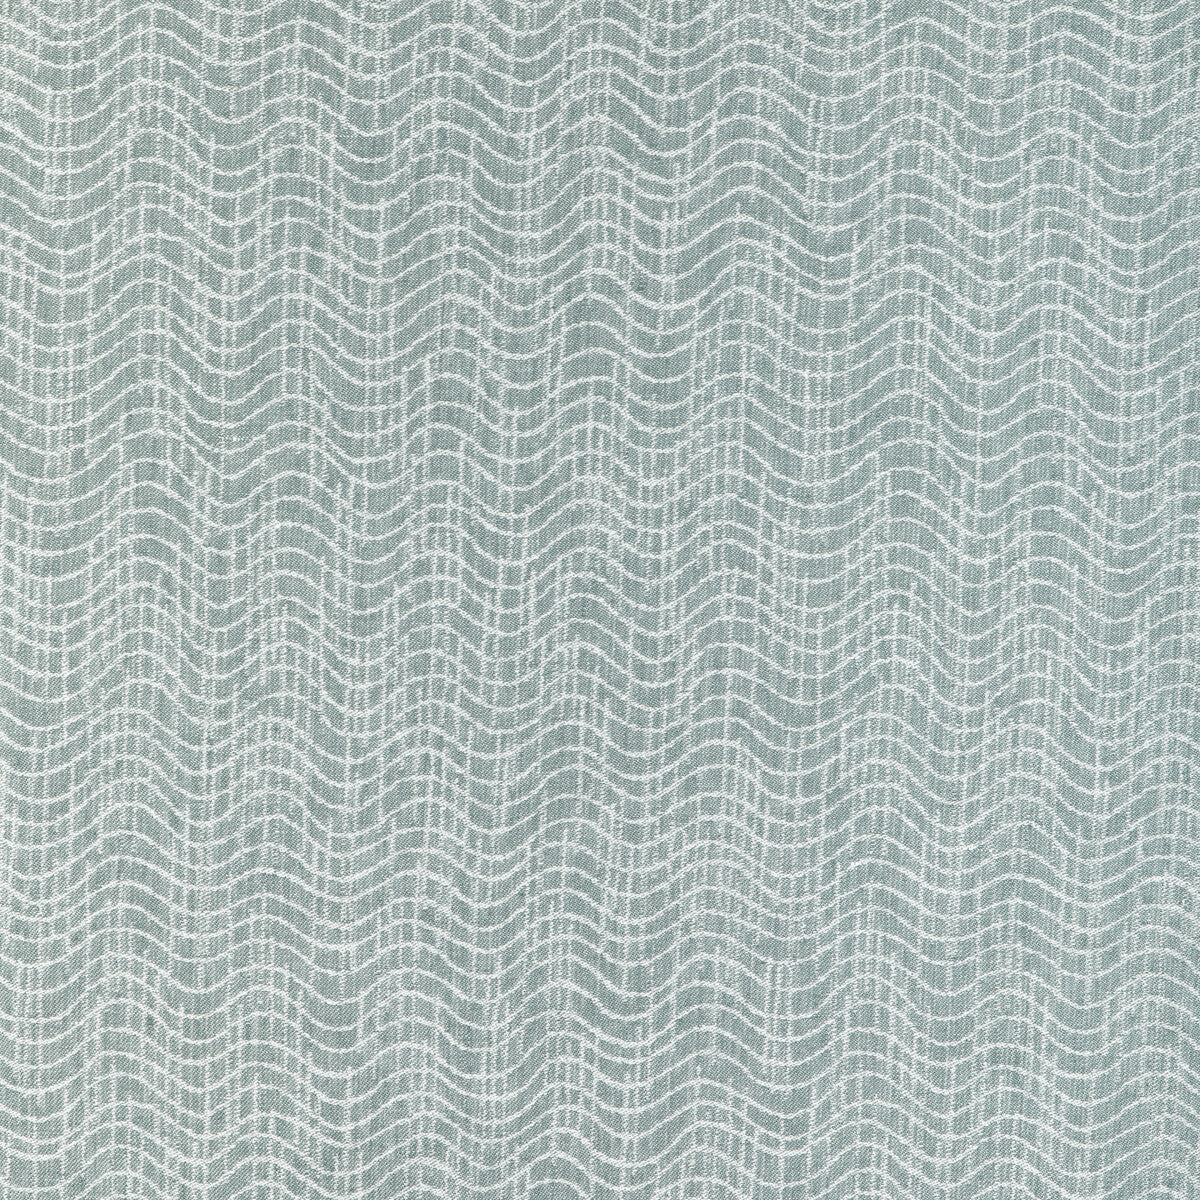 Dadami fabric in pool color - pattern GWF-3801.13.0 - by Lee Jofa Modern in the Kelly Wearstler VIII collection